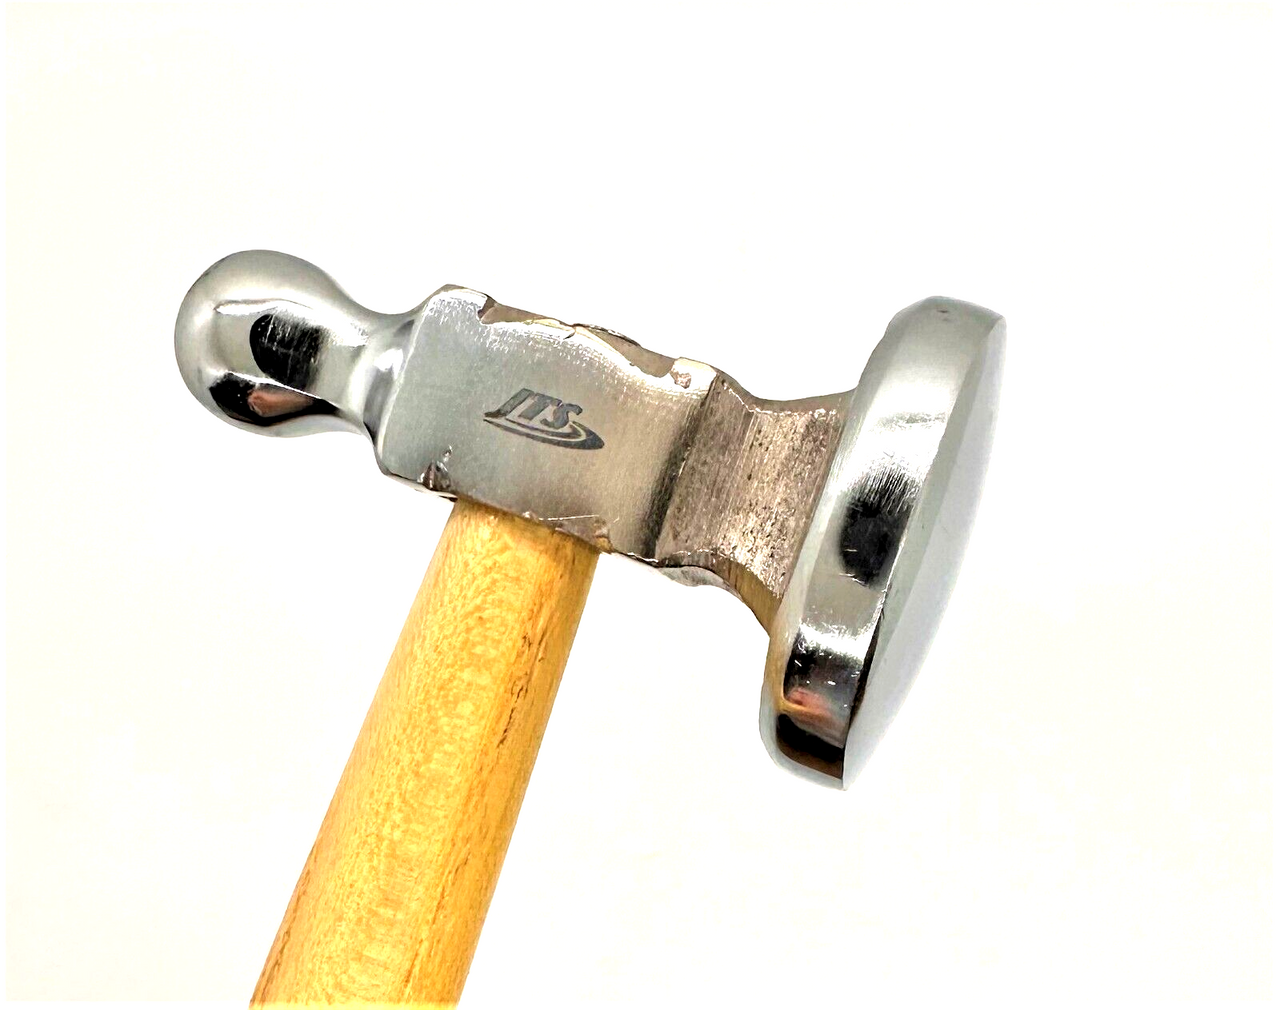 Hammers for Jewelry making | Watchmaking | Metal Hammers | DIY Hammers |  Diy tools | Chasing Hammer | Ball pin Hammer | Hobby Tools